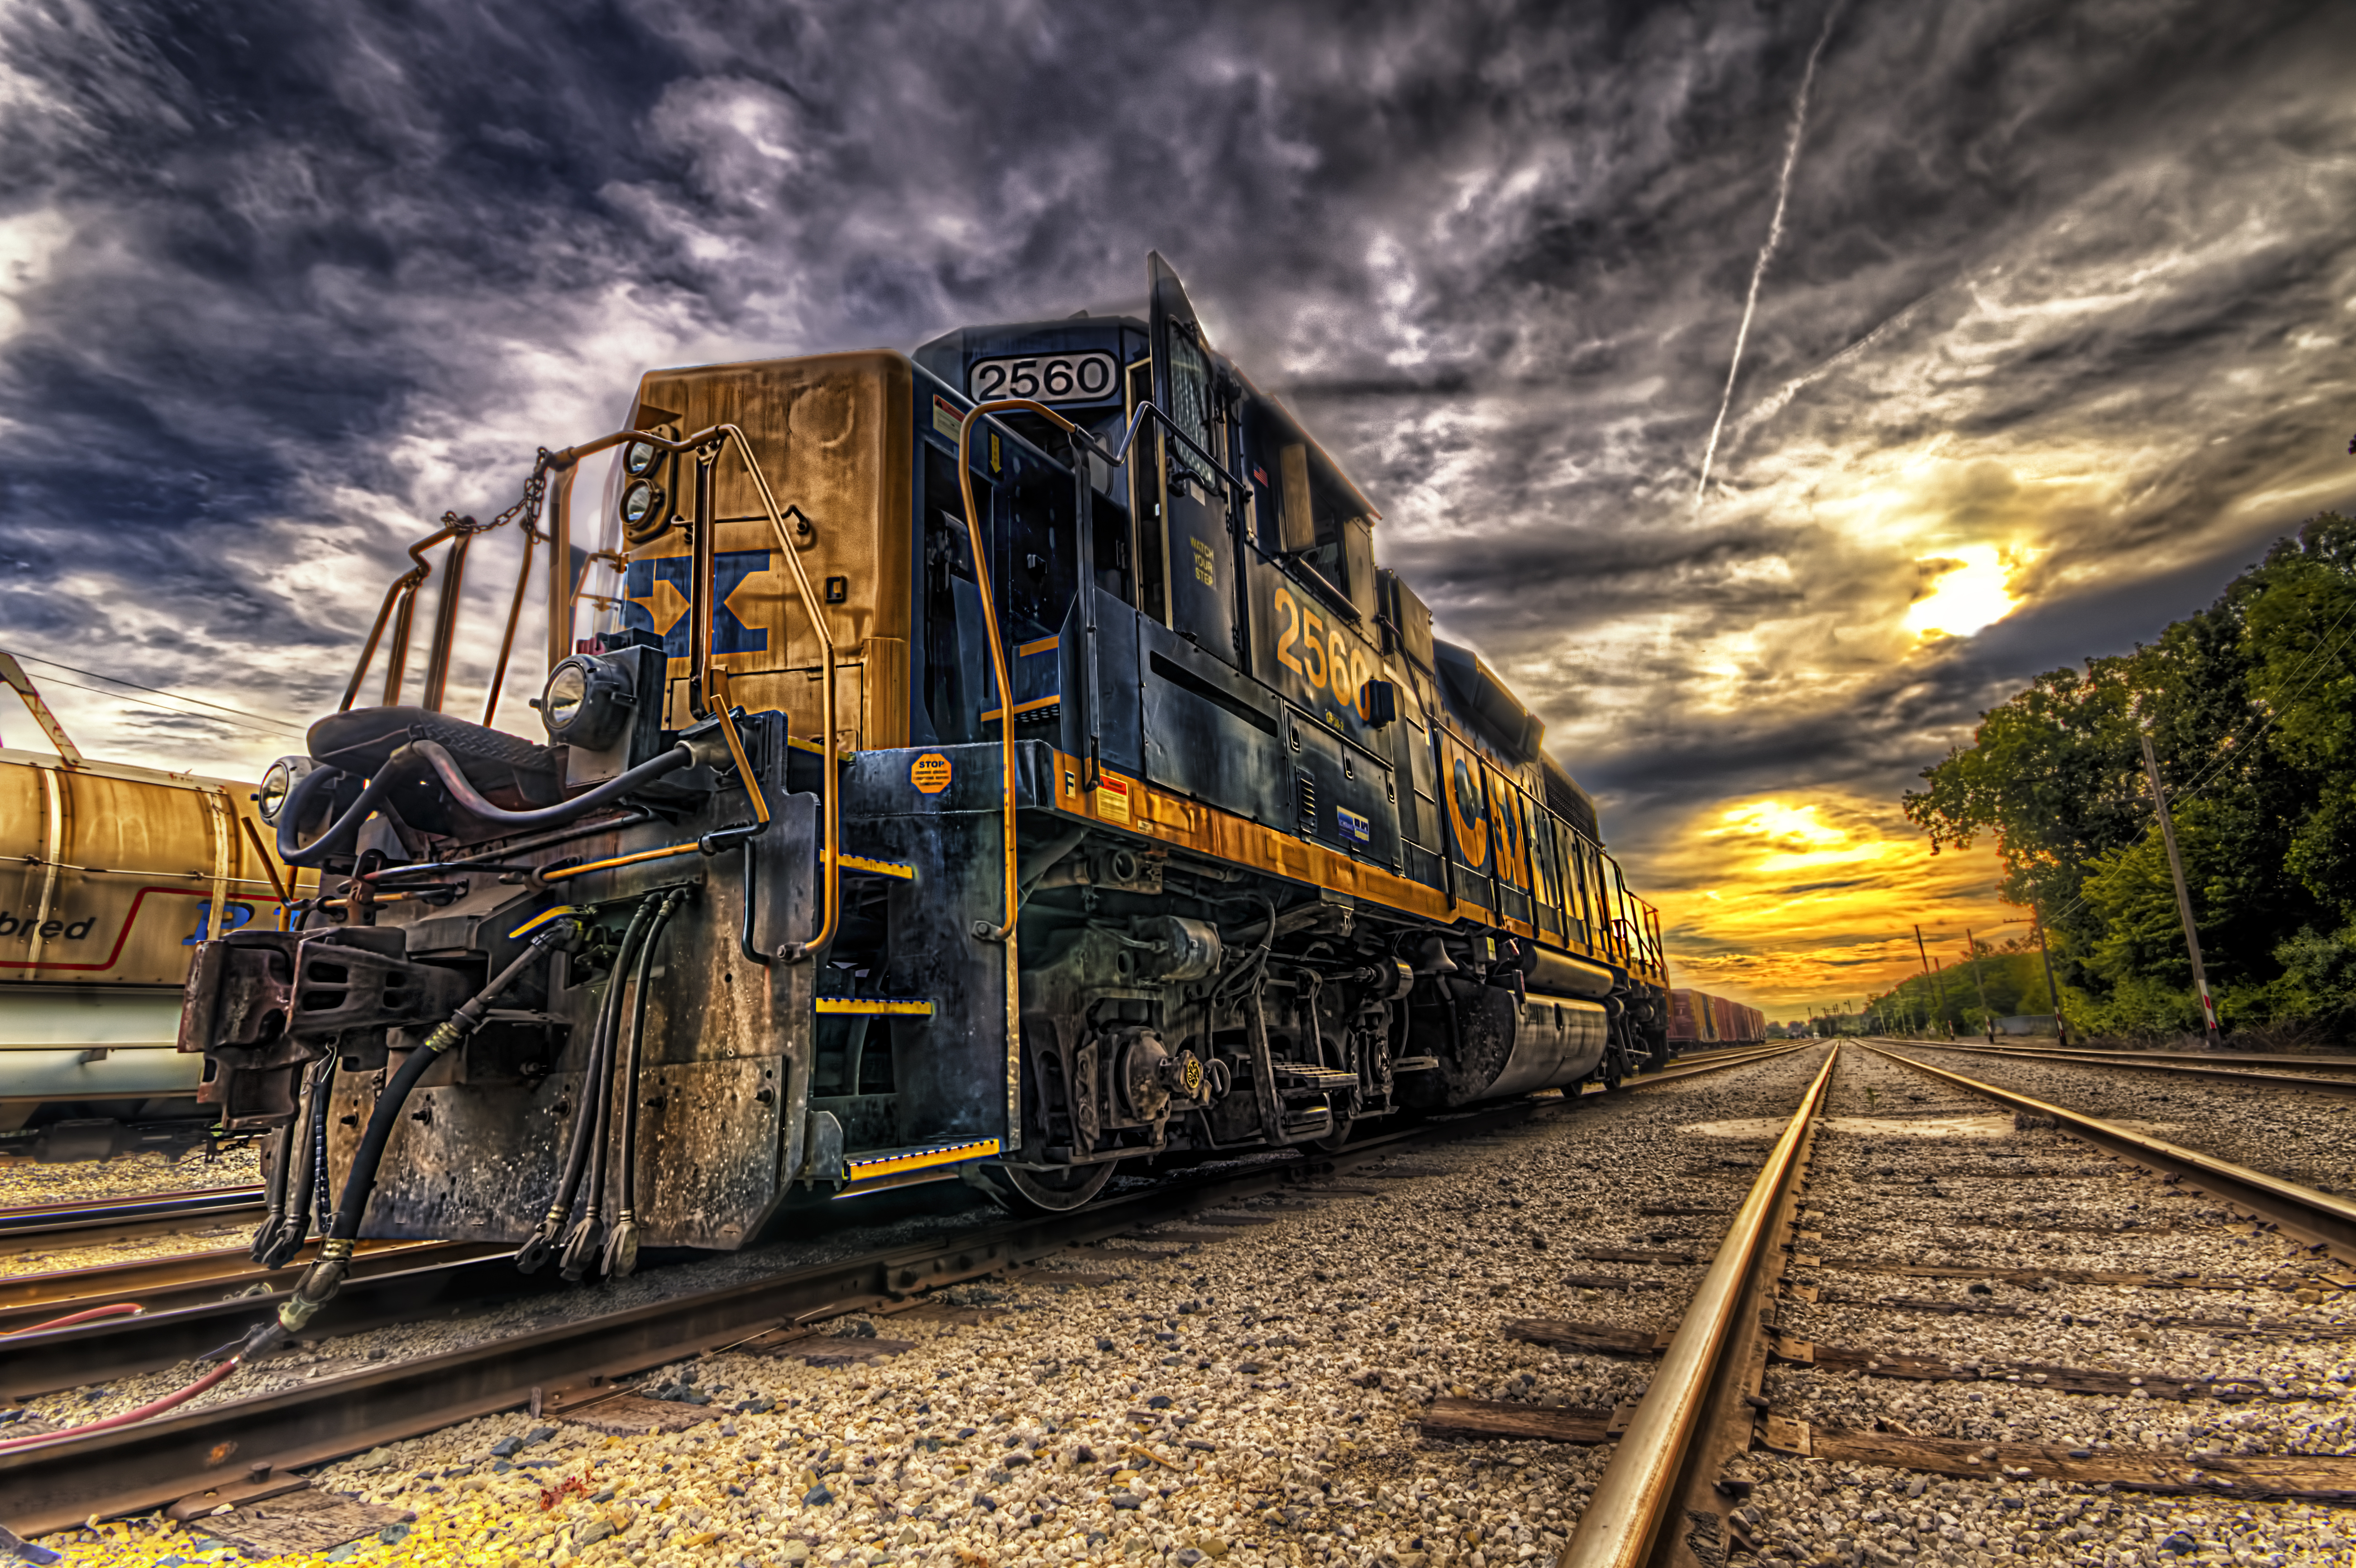 CSX Train #2560 and the Freaky Sky! | HDR creme